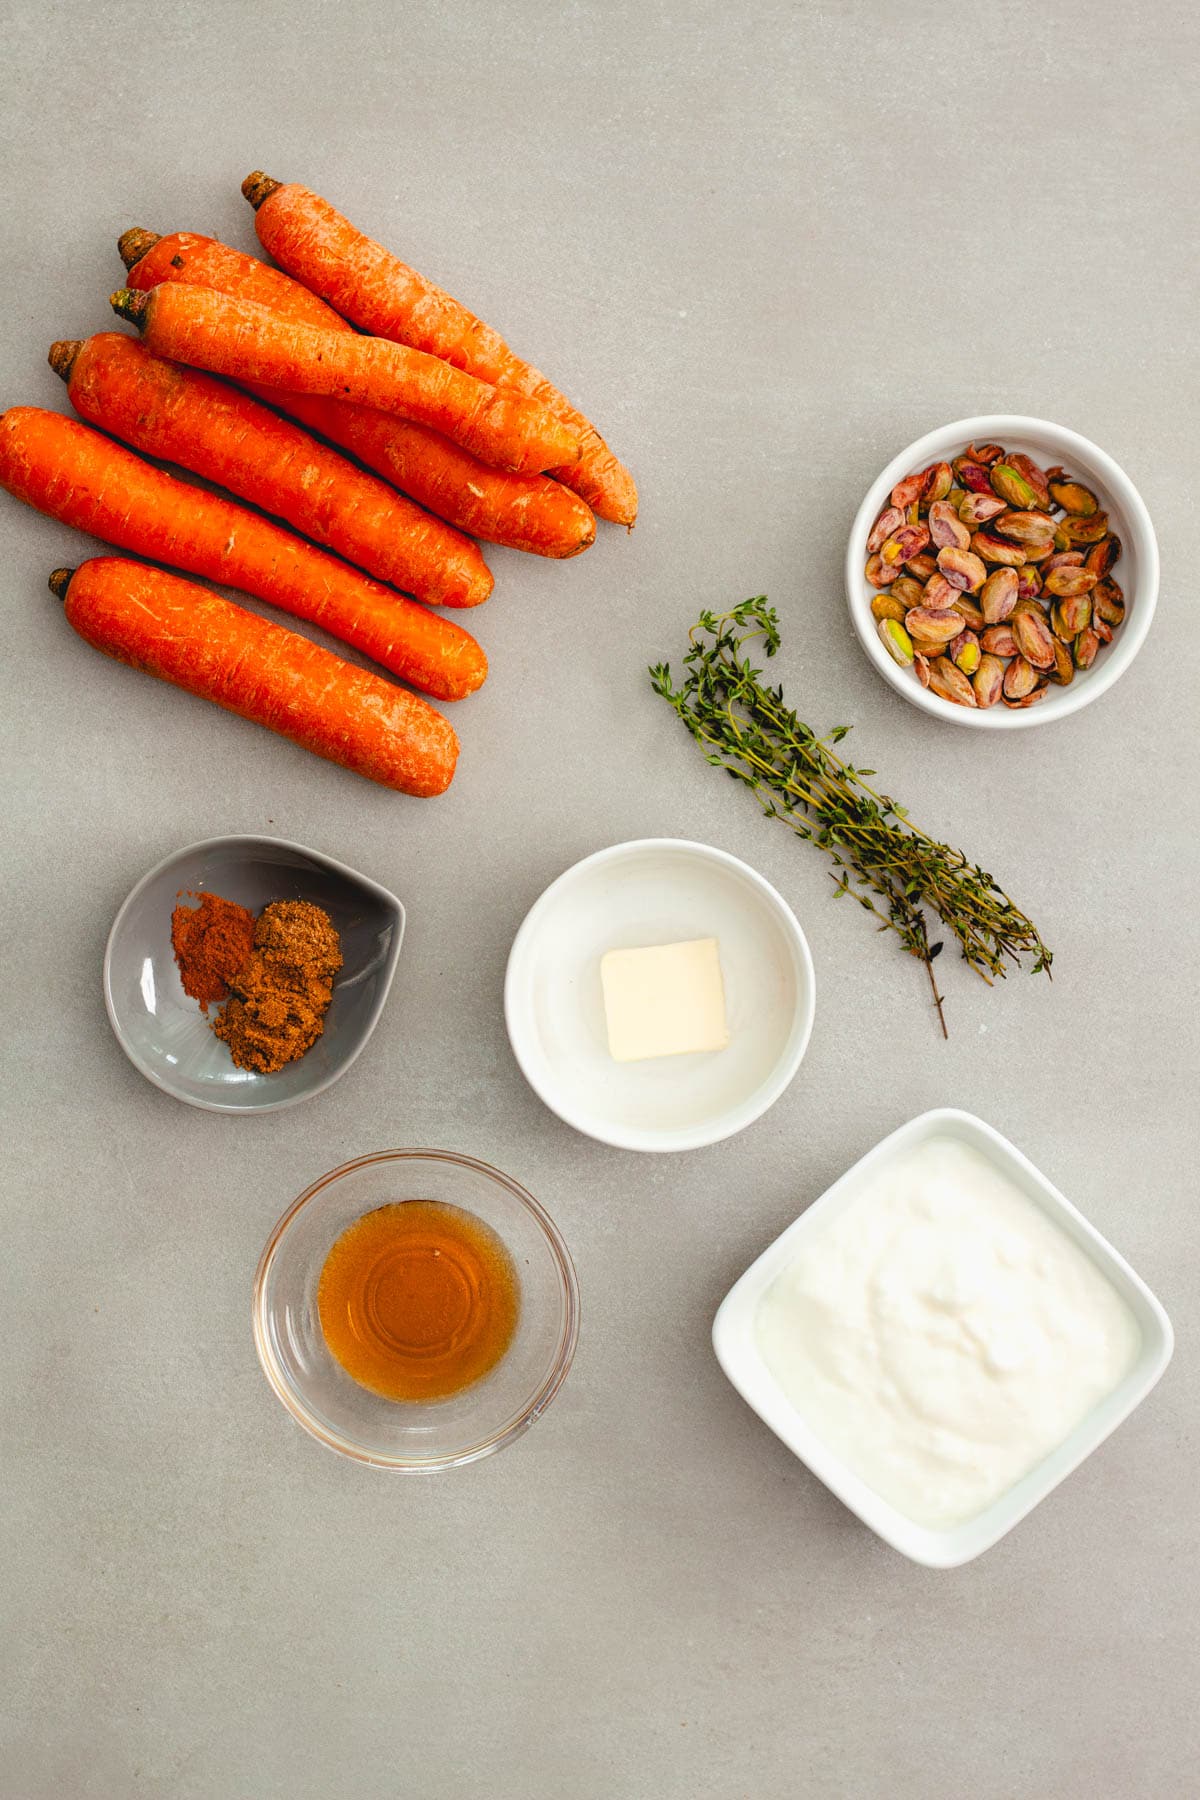 Ingredients for sauteed spiced carrots with pistachios on a gray table.